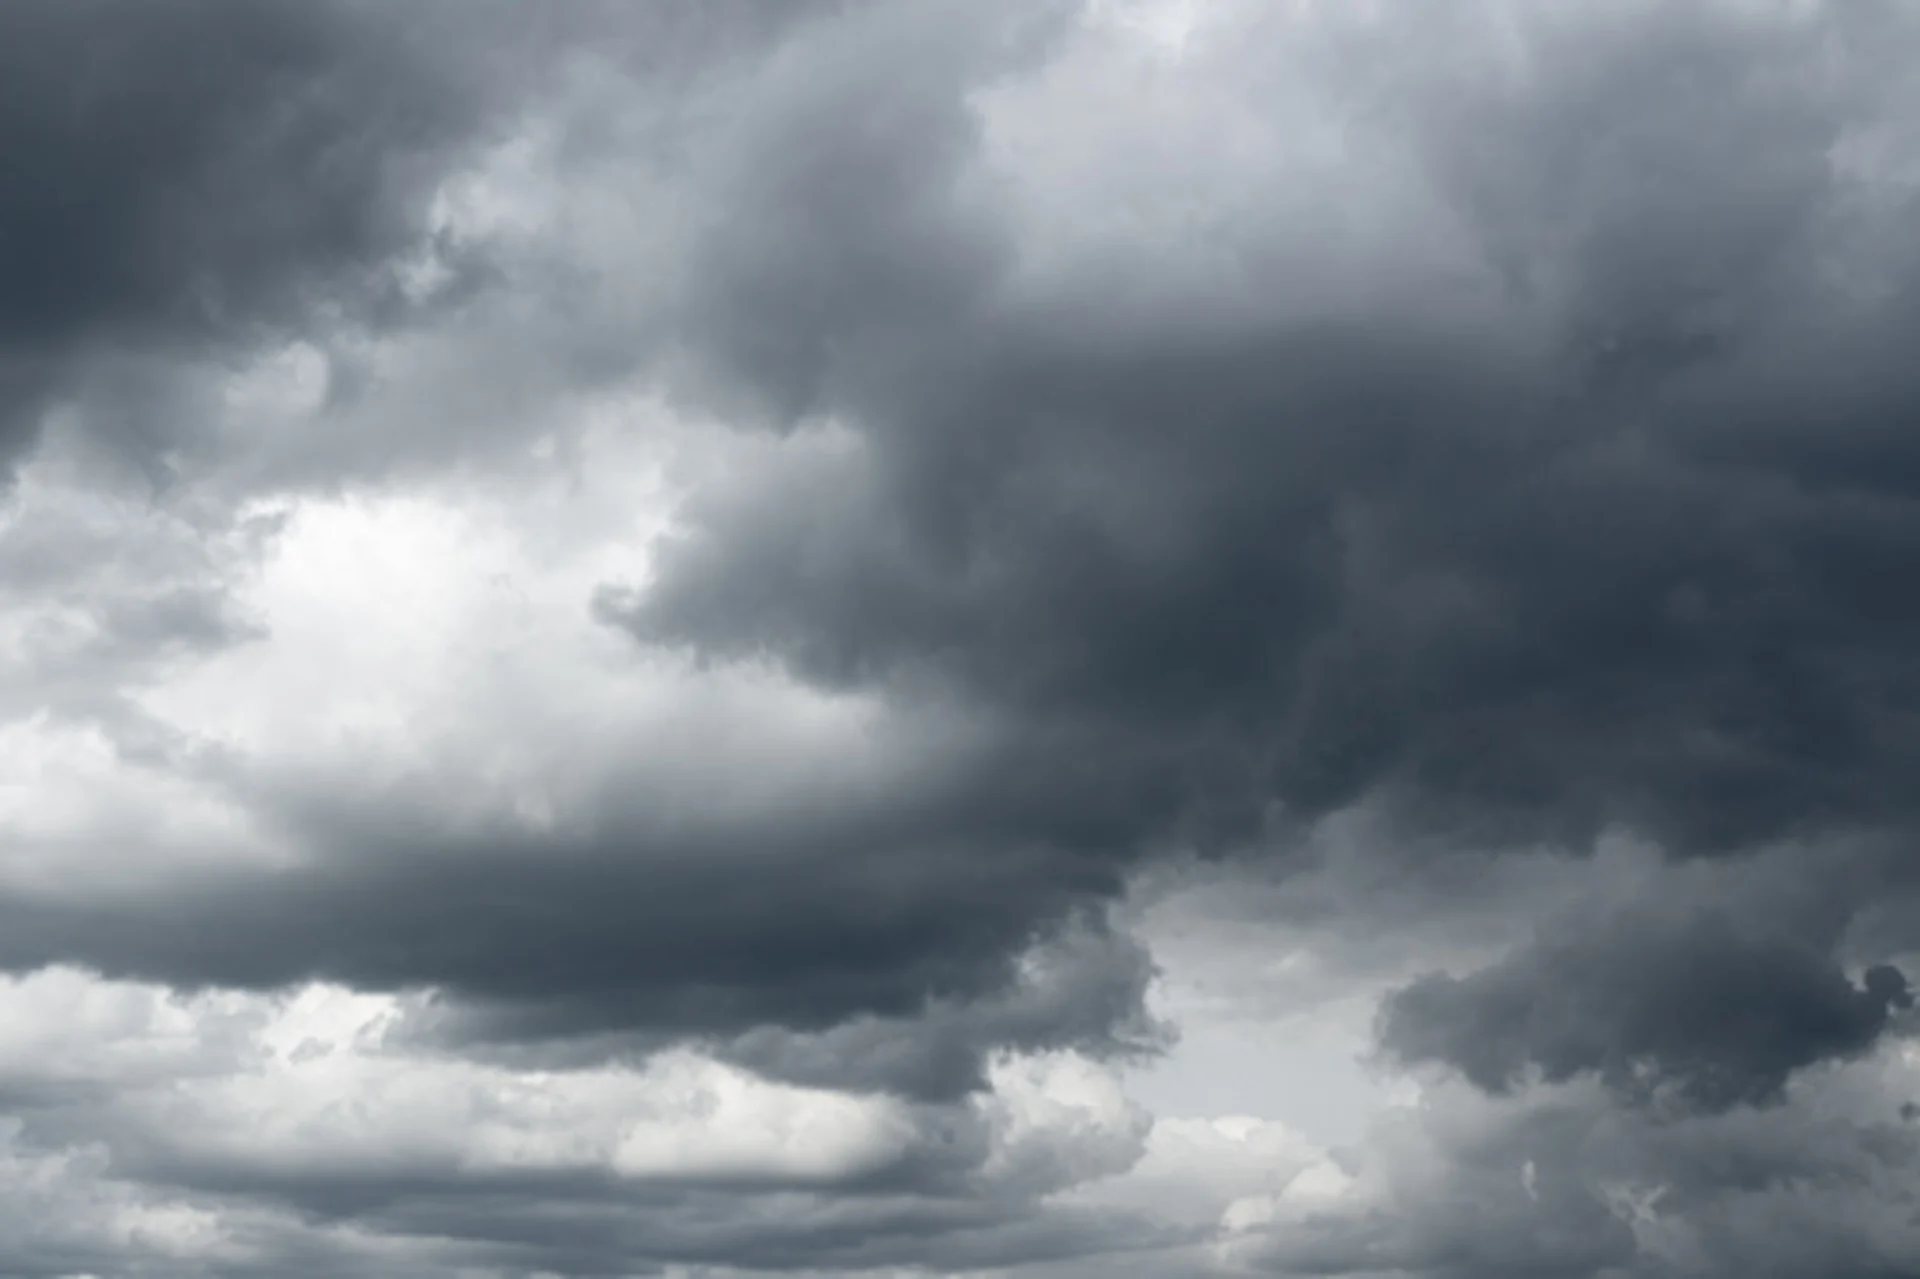 Warm, humid air mass fuels a thunderstorm risk in southern Ontario